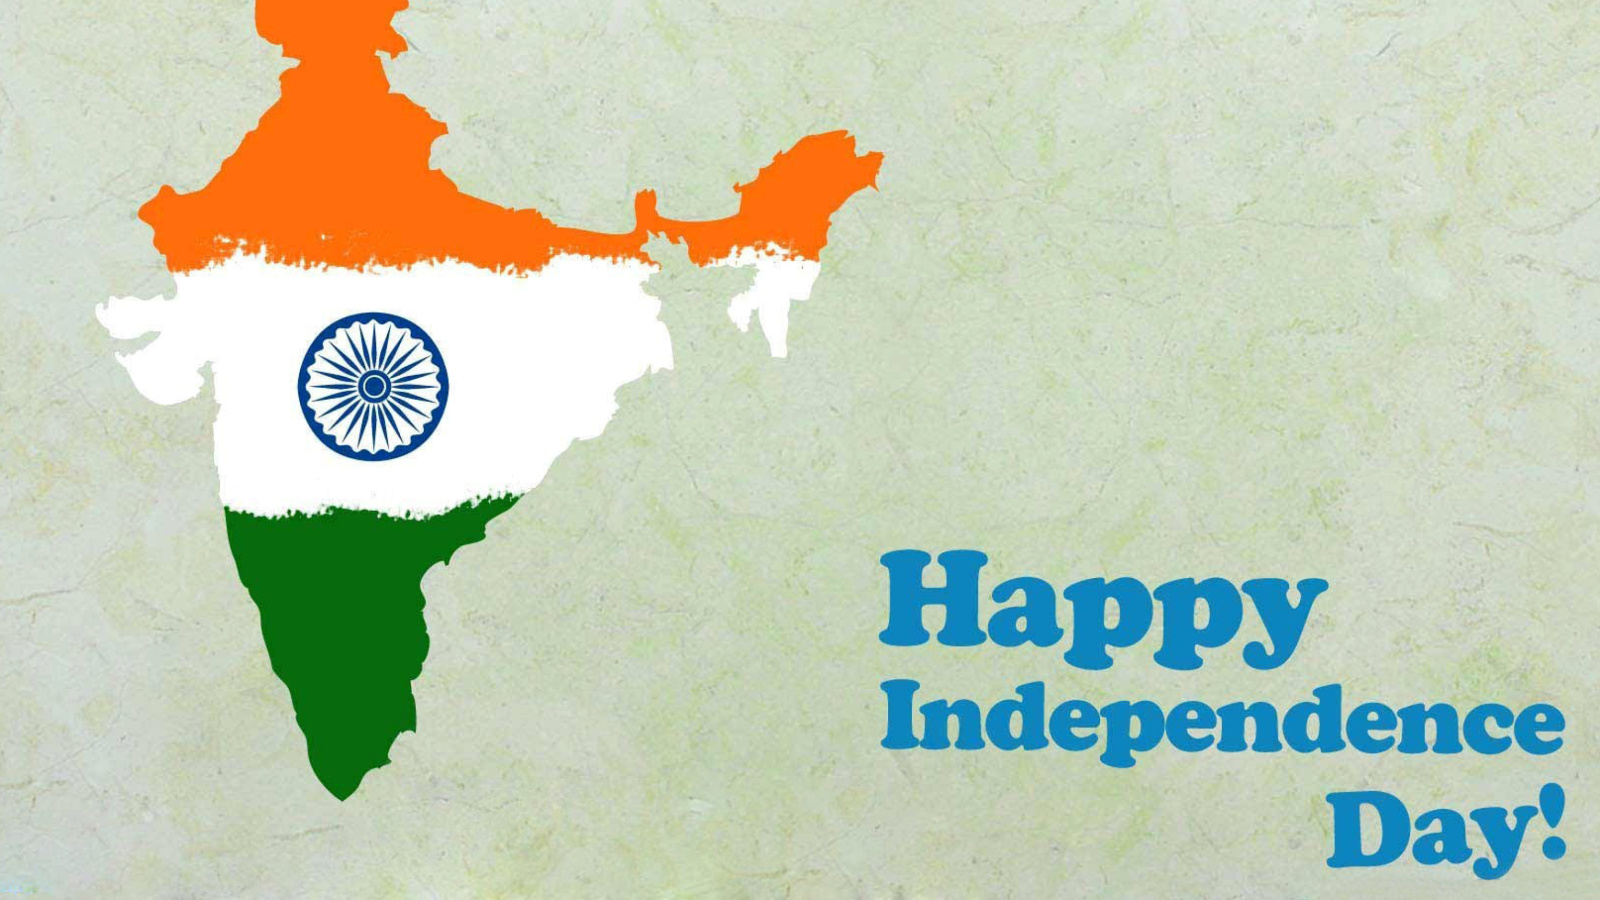 Happy Independence Day India screenshot #1 1600x900